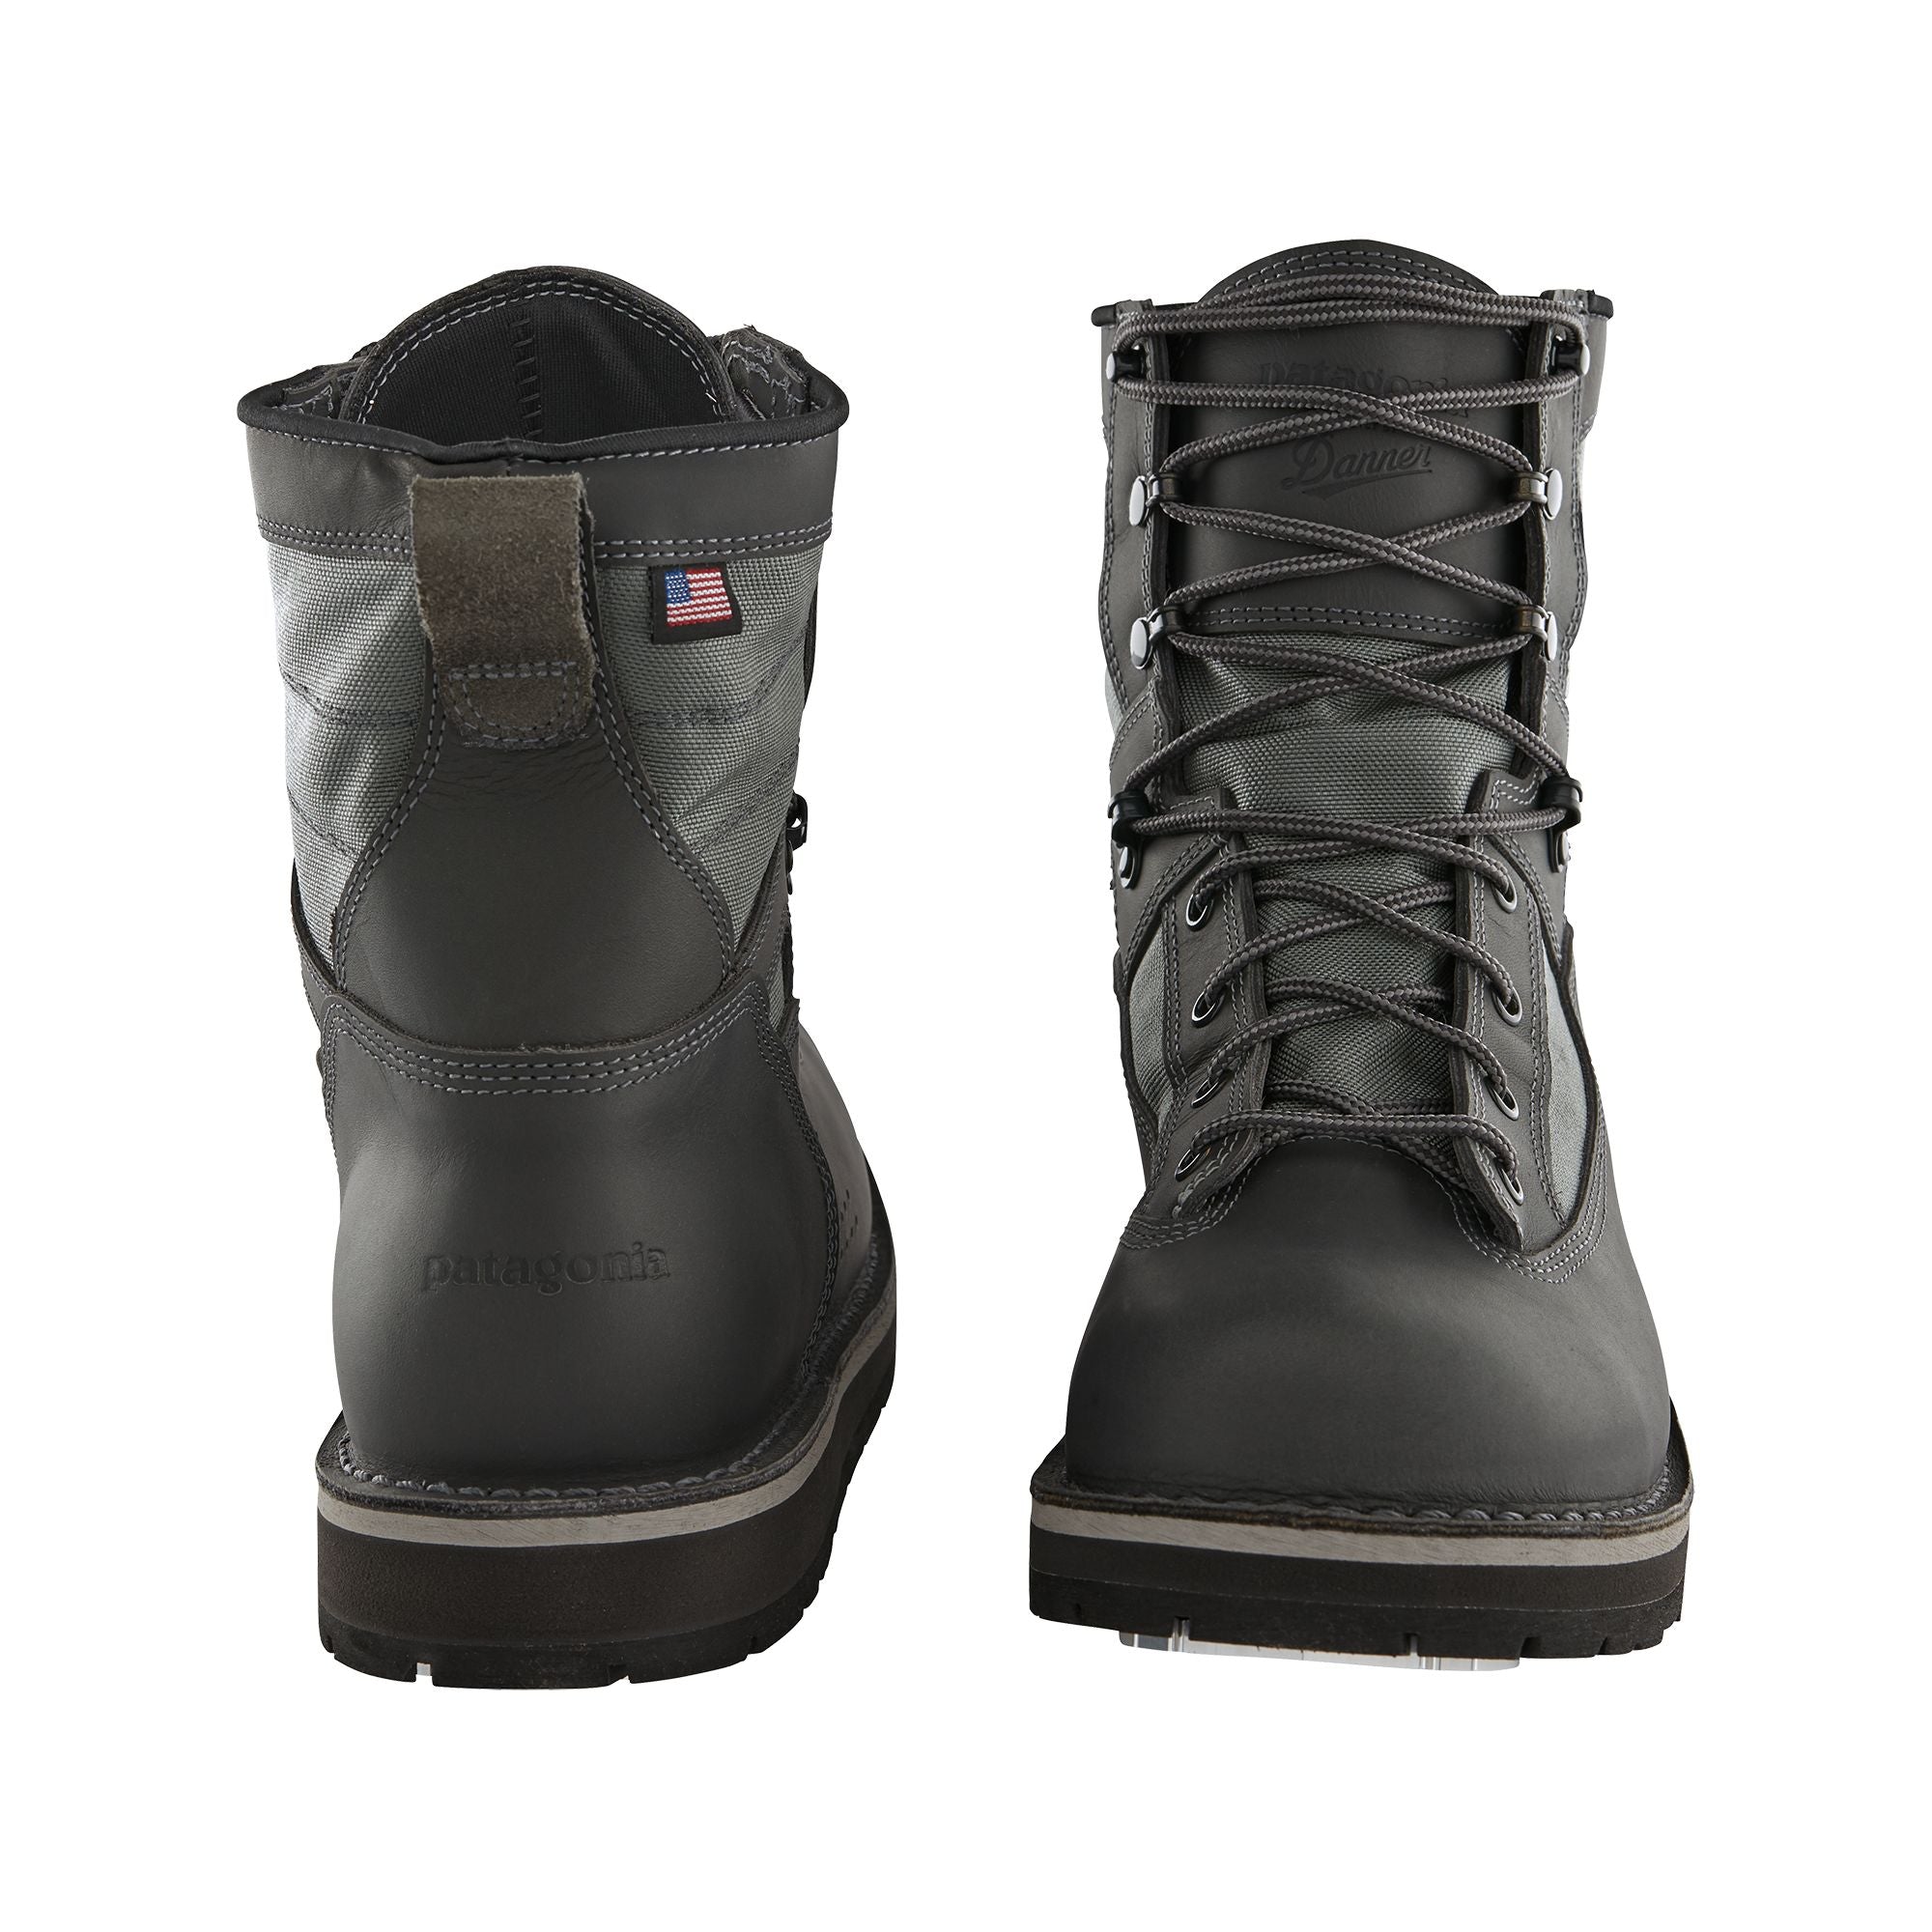 PRO LT Wading Boots